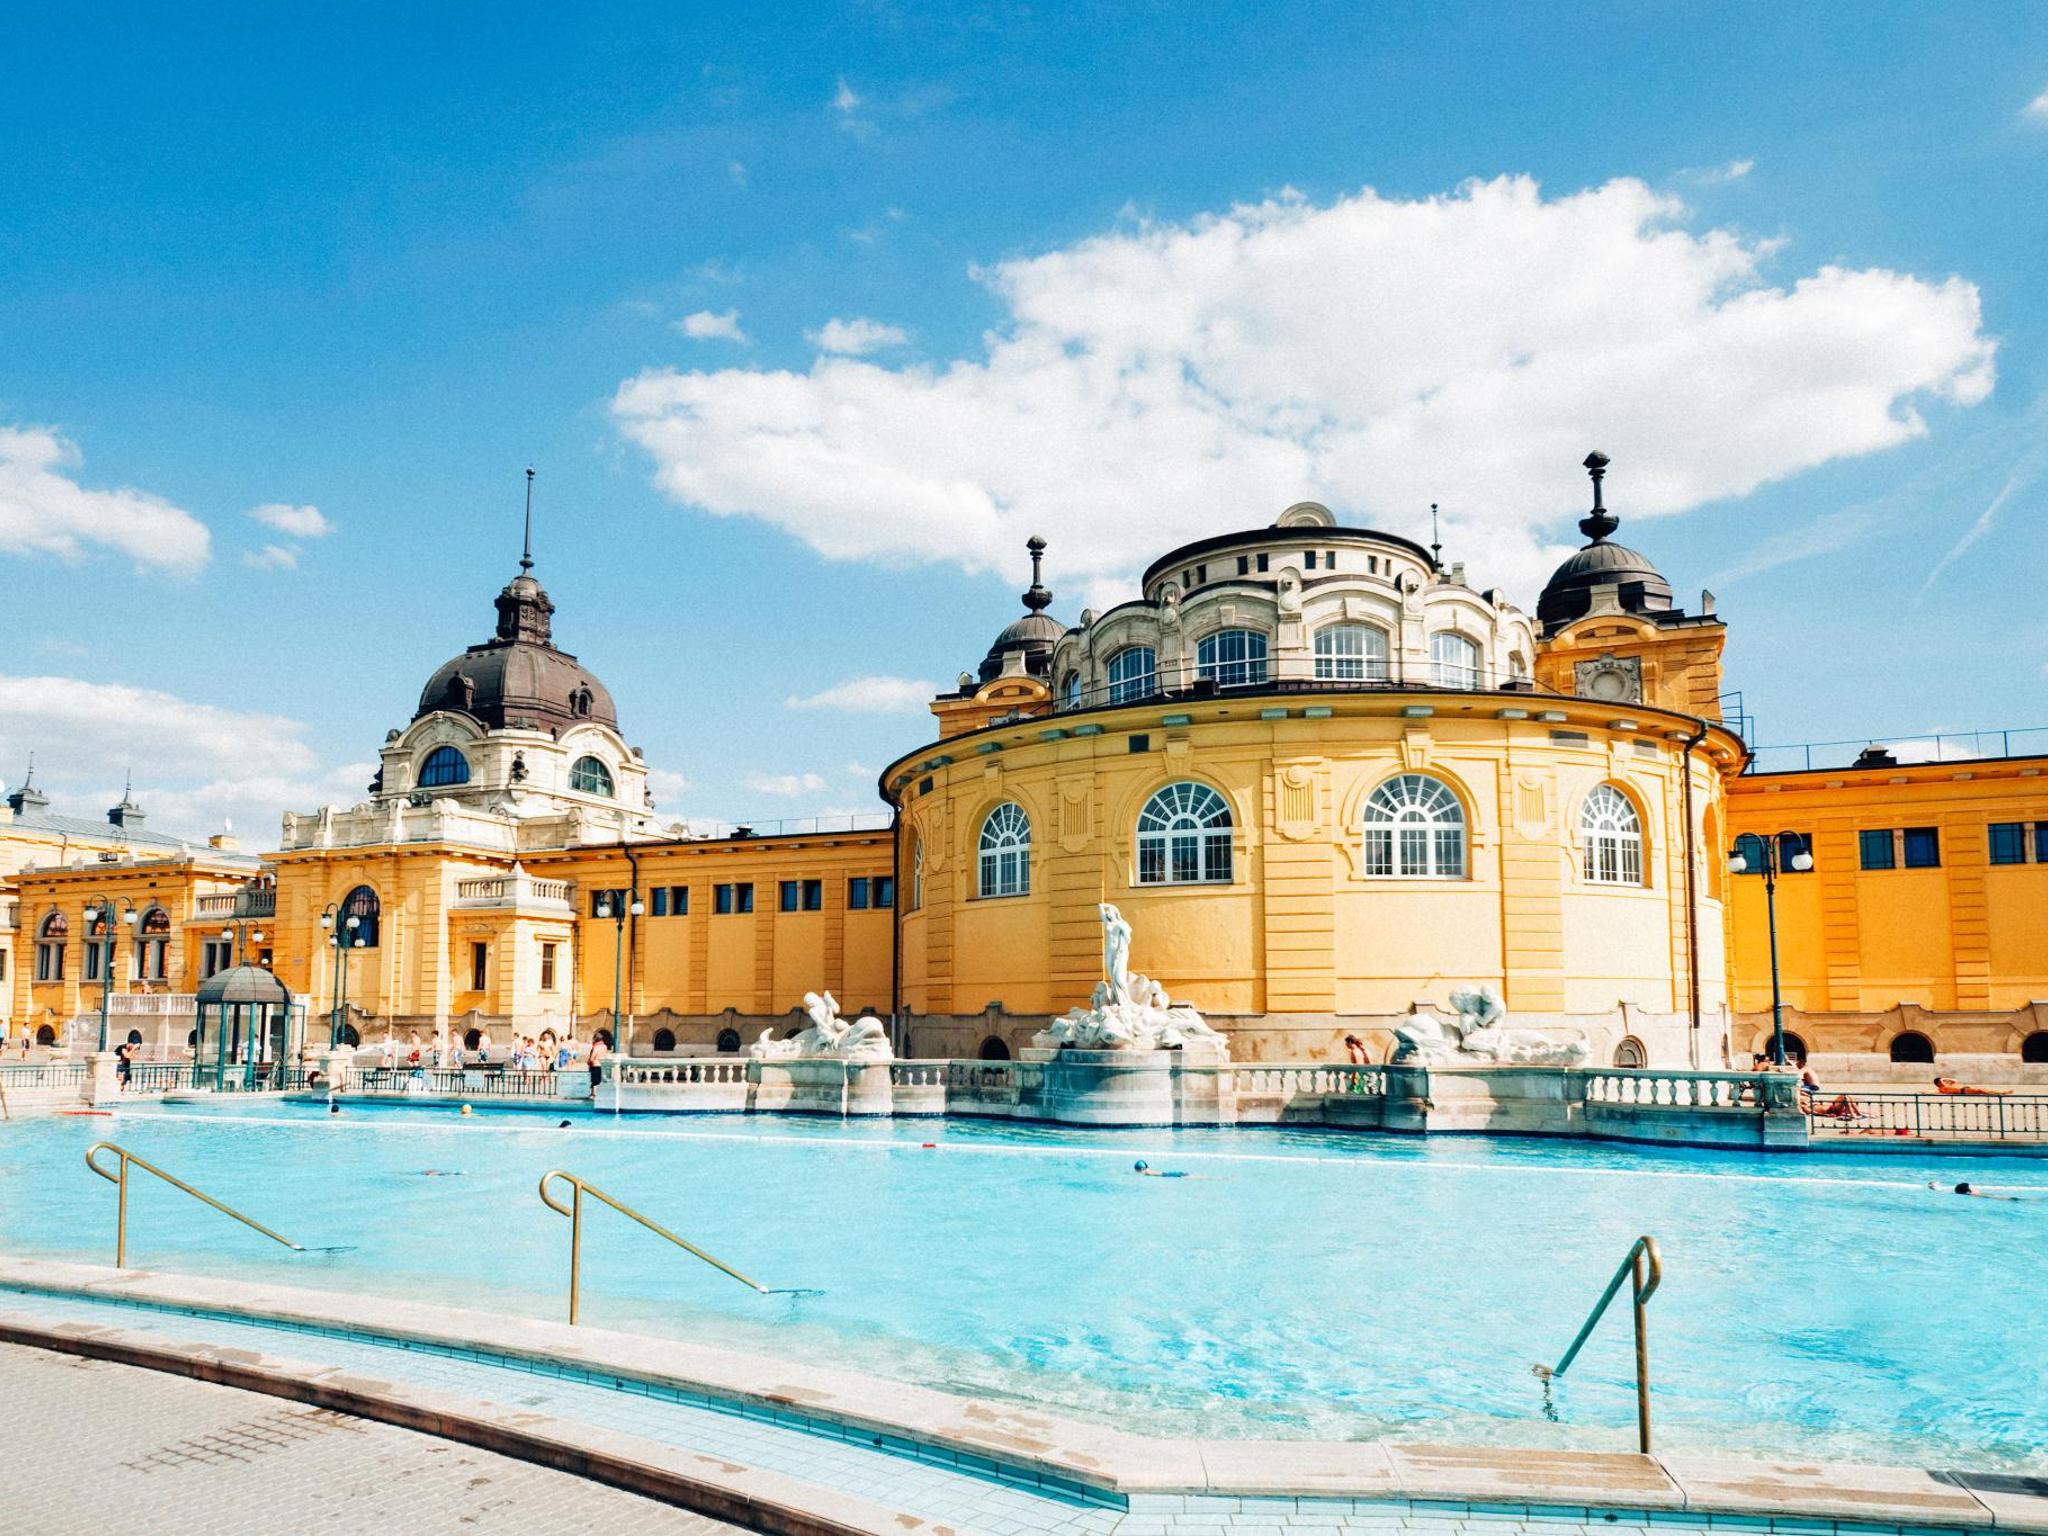 The best thermal baths in Budapest | Booking.com